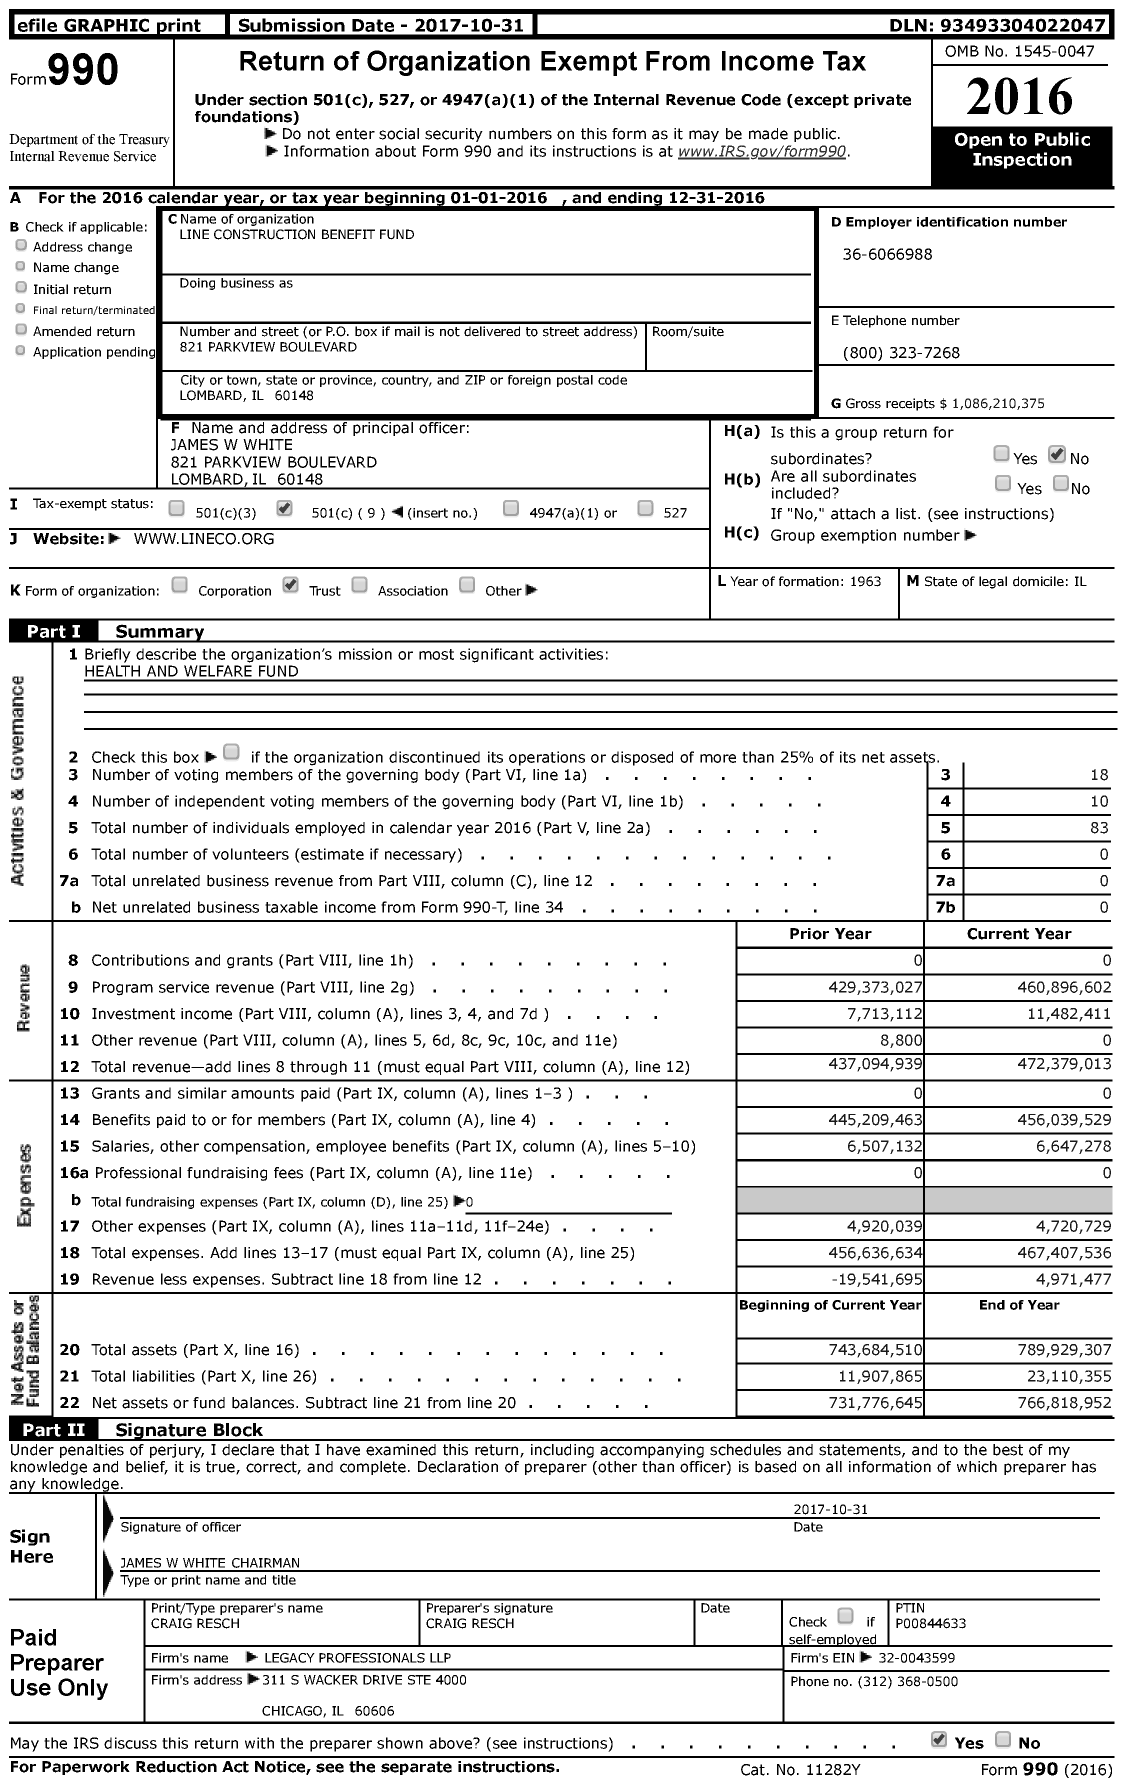 Image of first page of 2016 Form 990 for Line Construction Benefit Fund